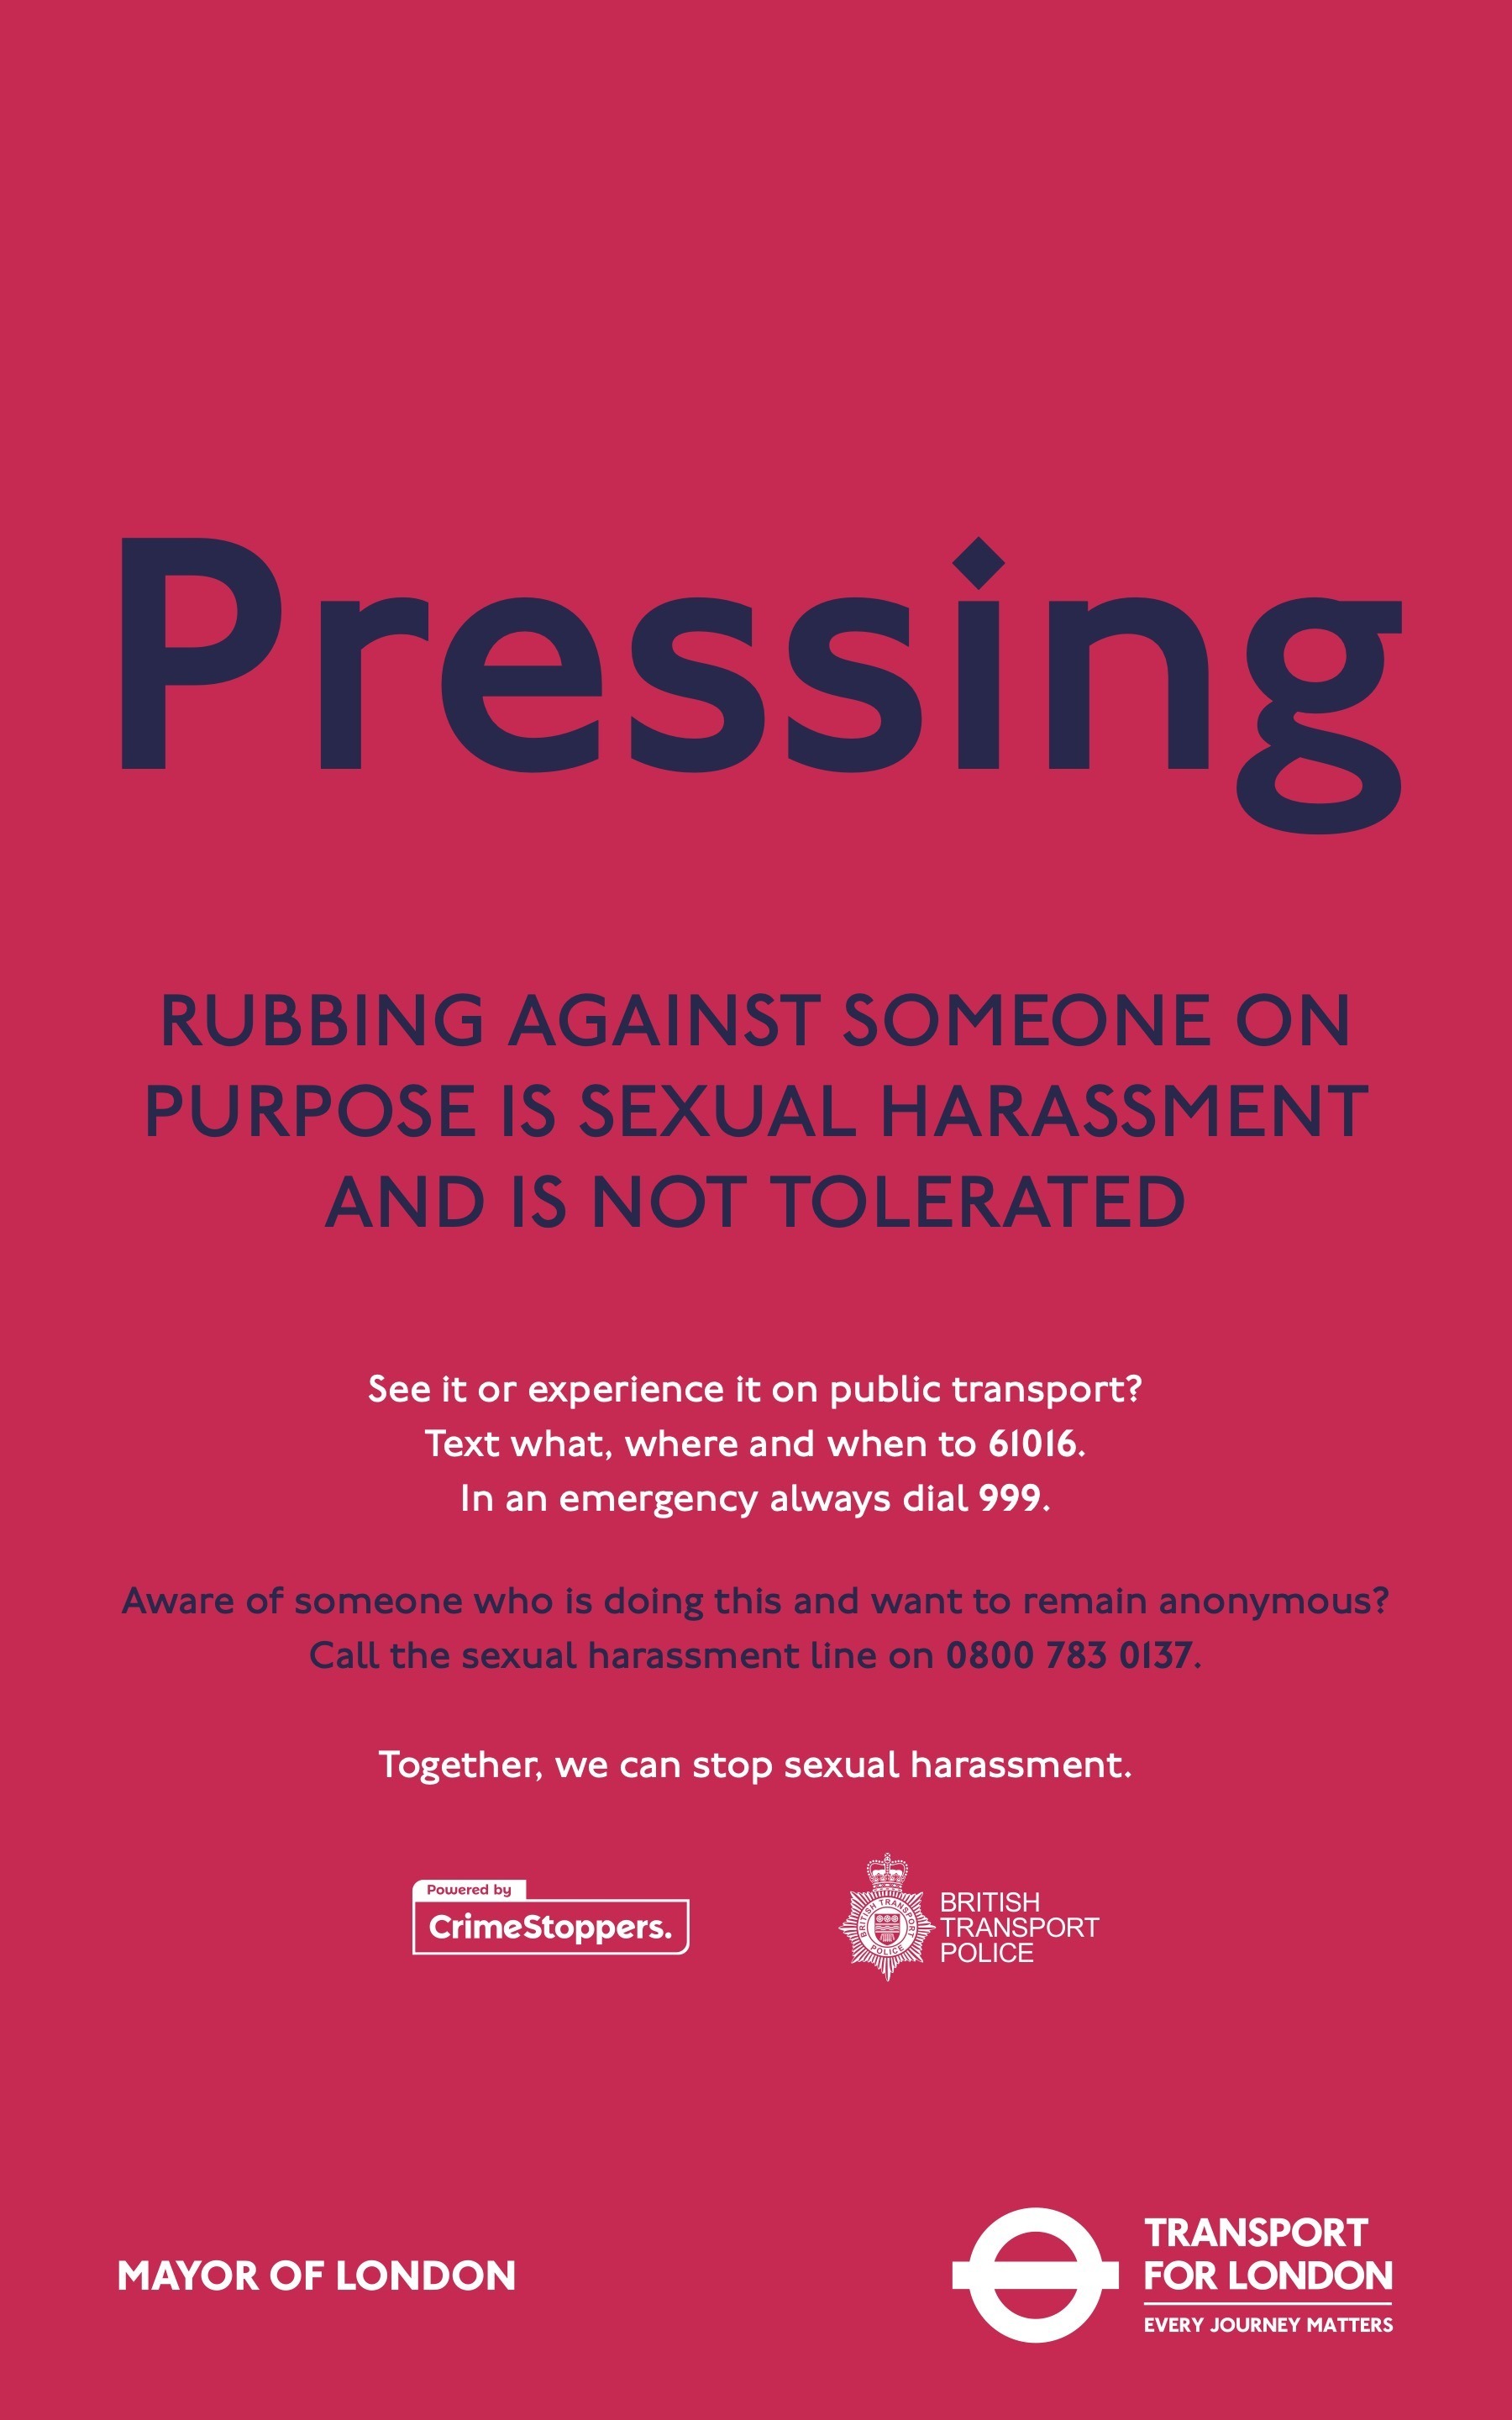 Posters will appear across London aiming to challenge the normalisation of harassment